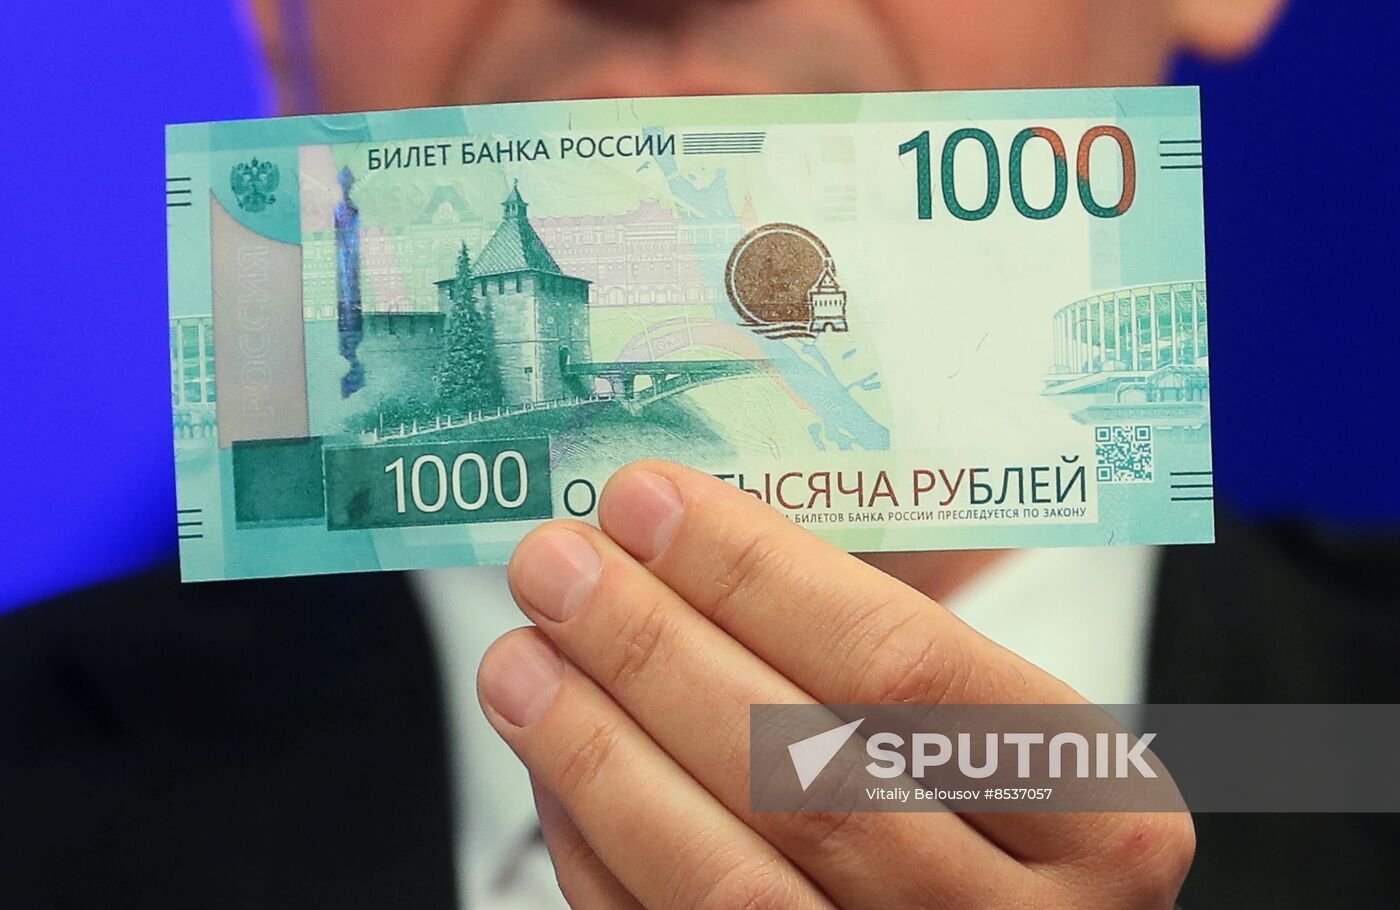 Russia Economy Banknotes